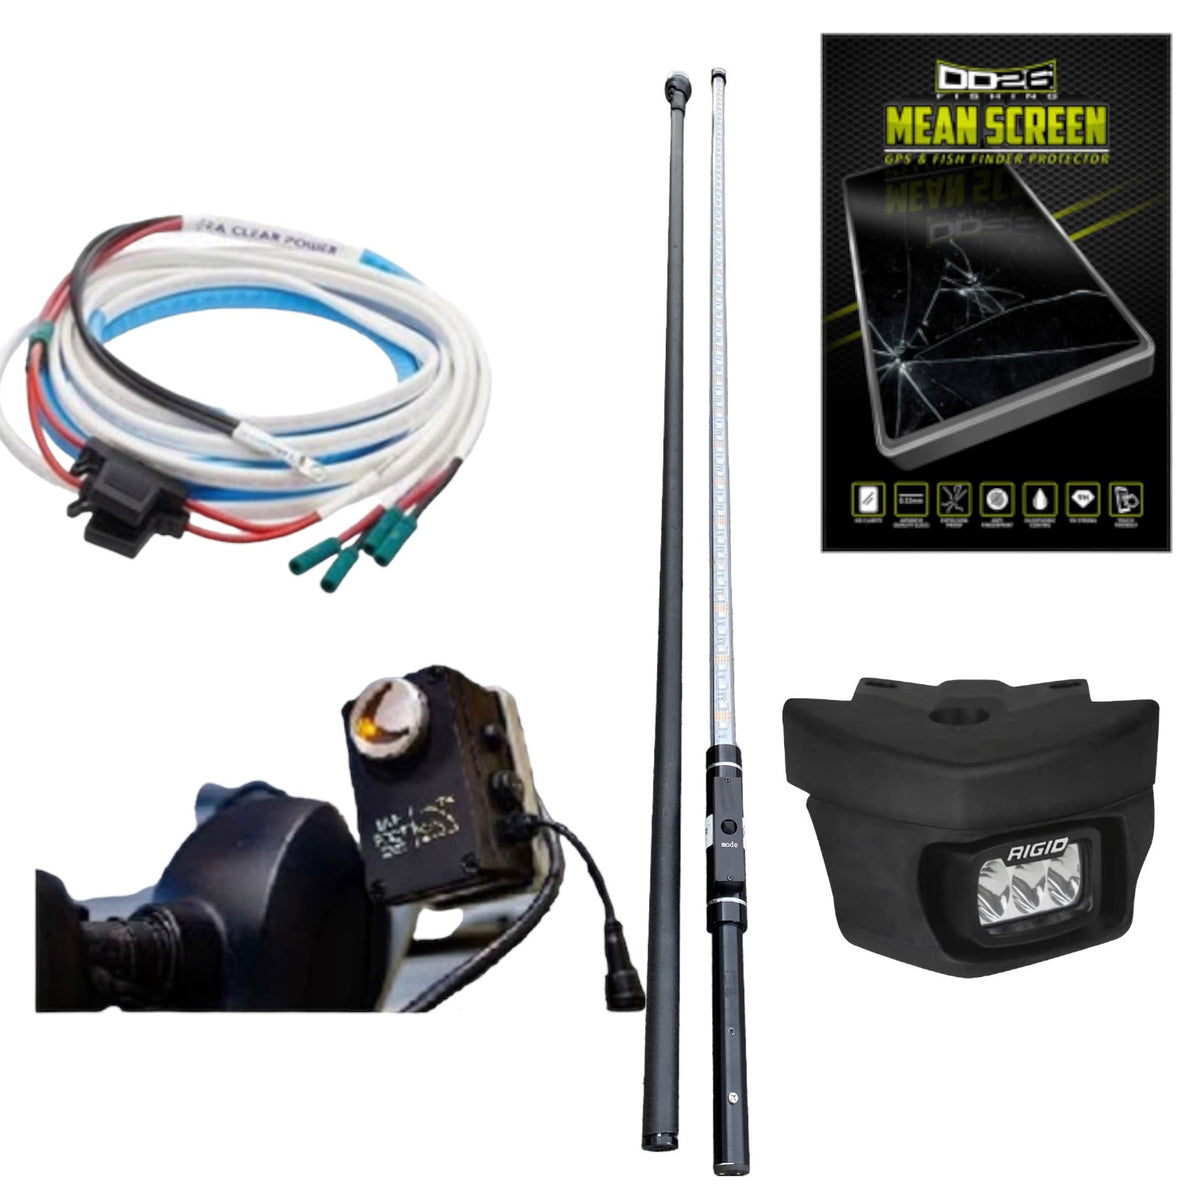 Electronic Accessories, Lights and Live Foot – Tagged Screen Protectors  and Covers Humminbird – DD26 Fishing